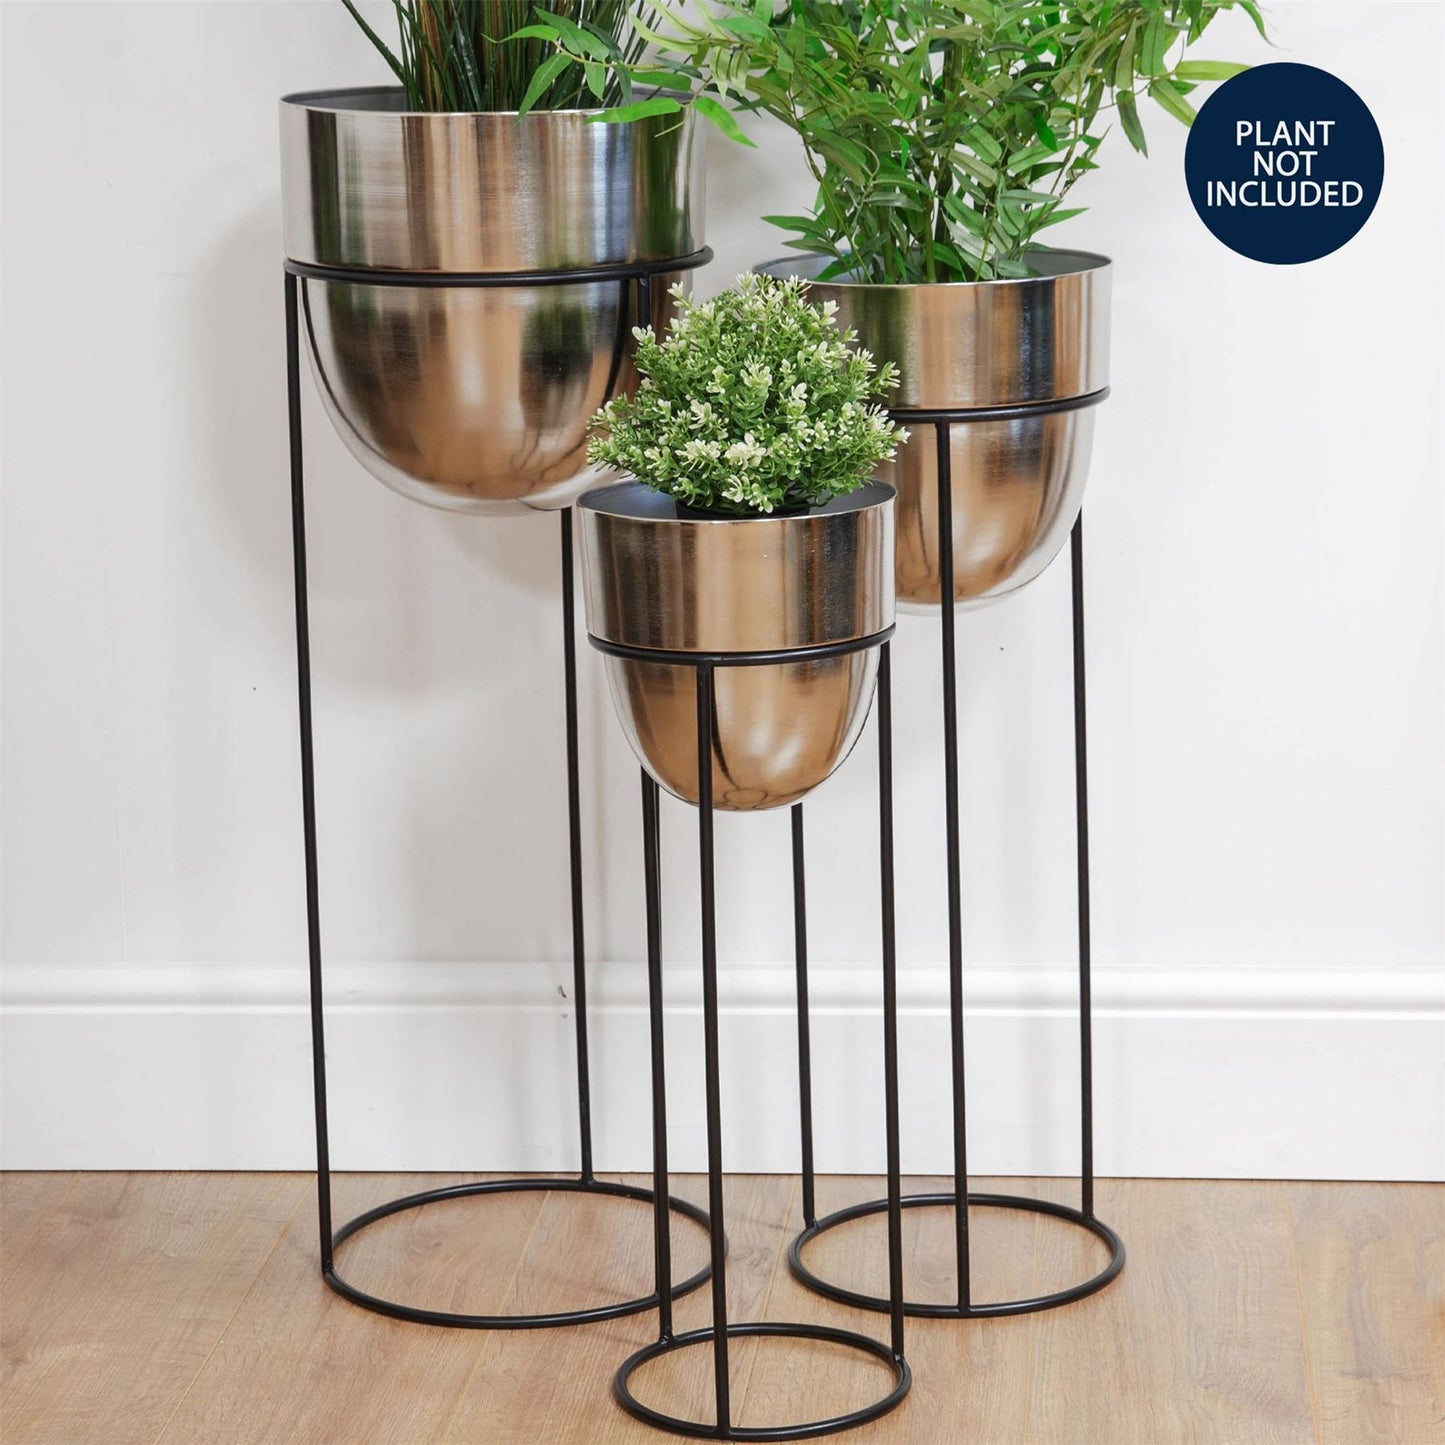 Hestia Set of 3 Extra Tall Silver Metal Planters